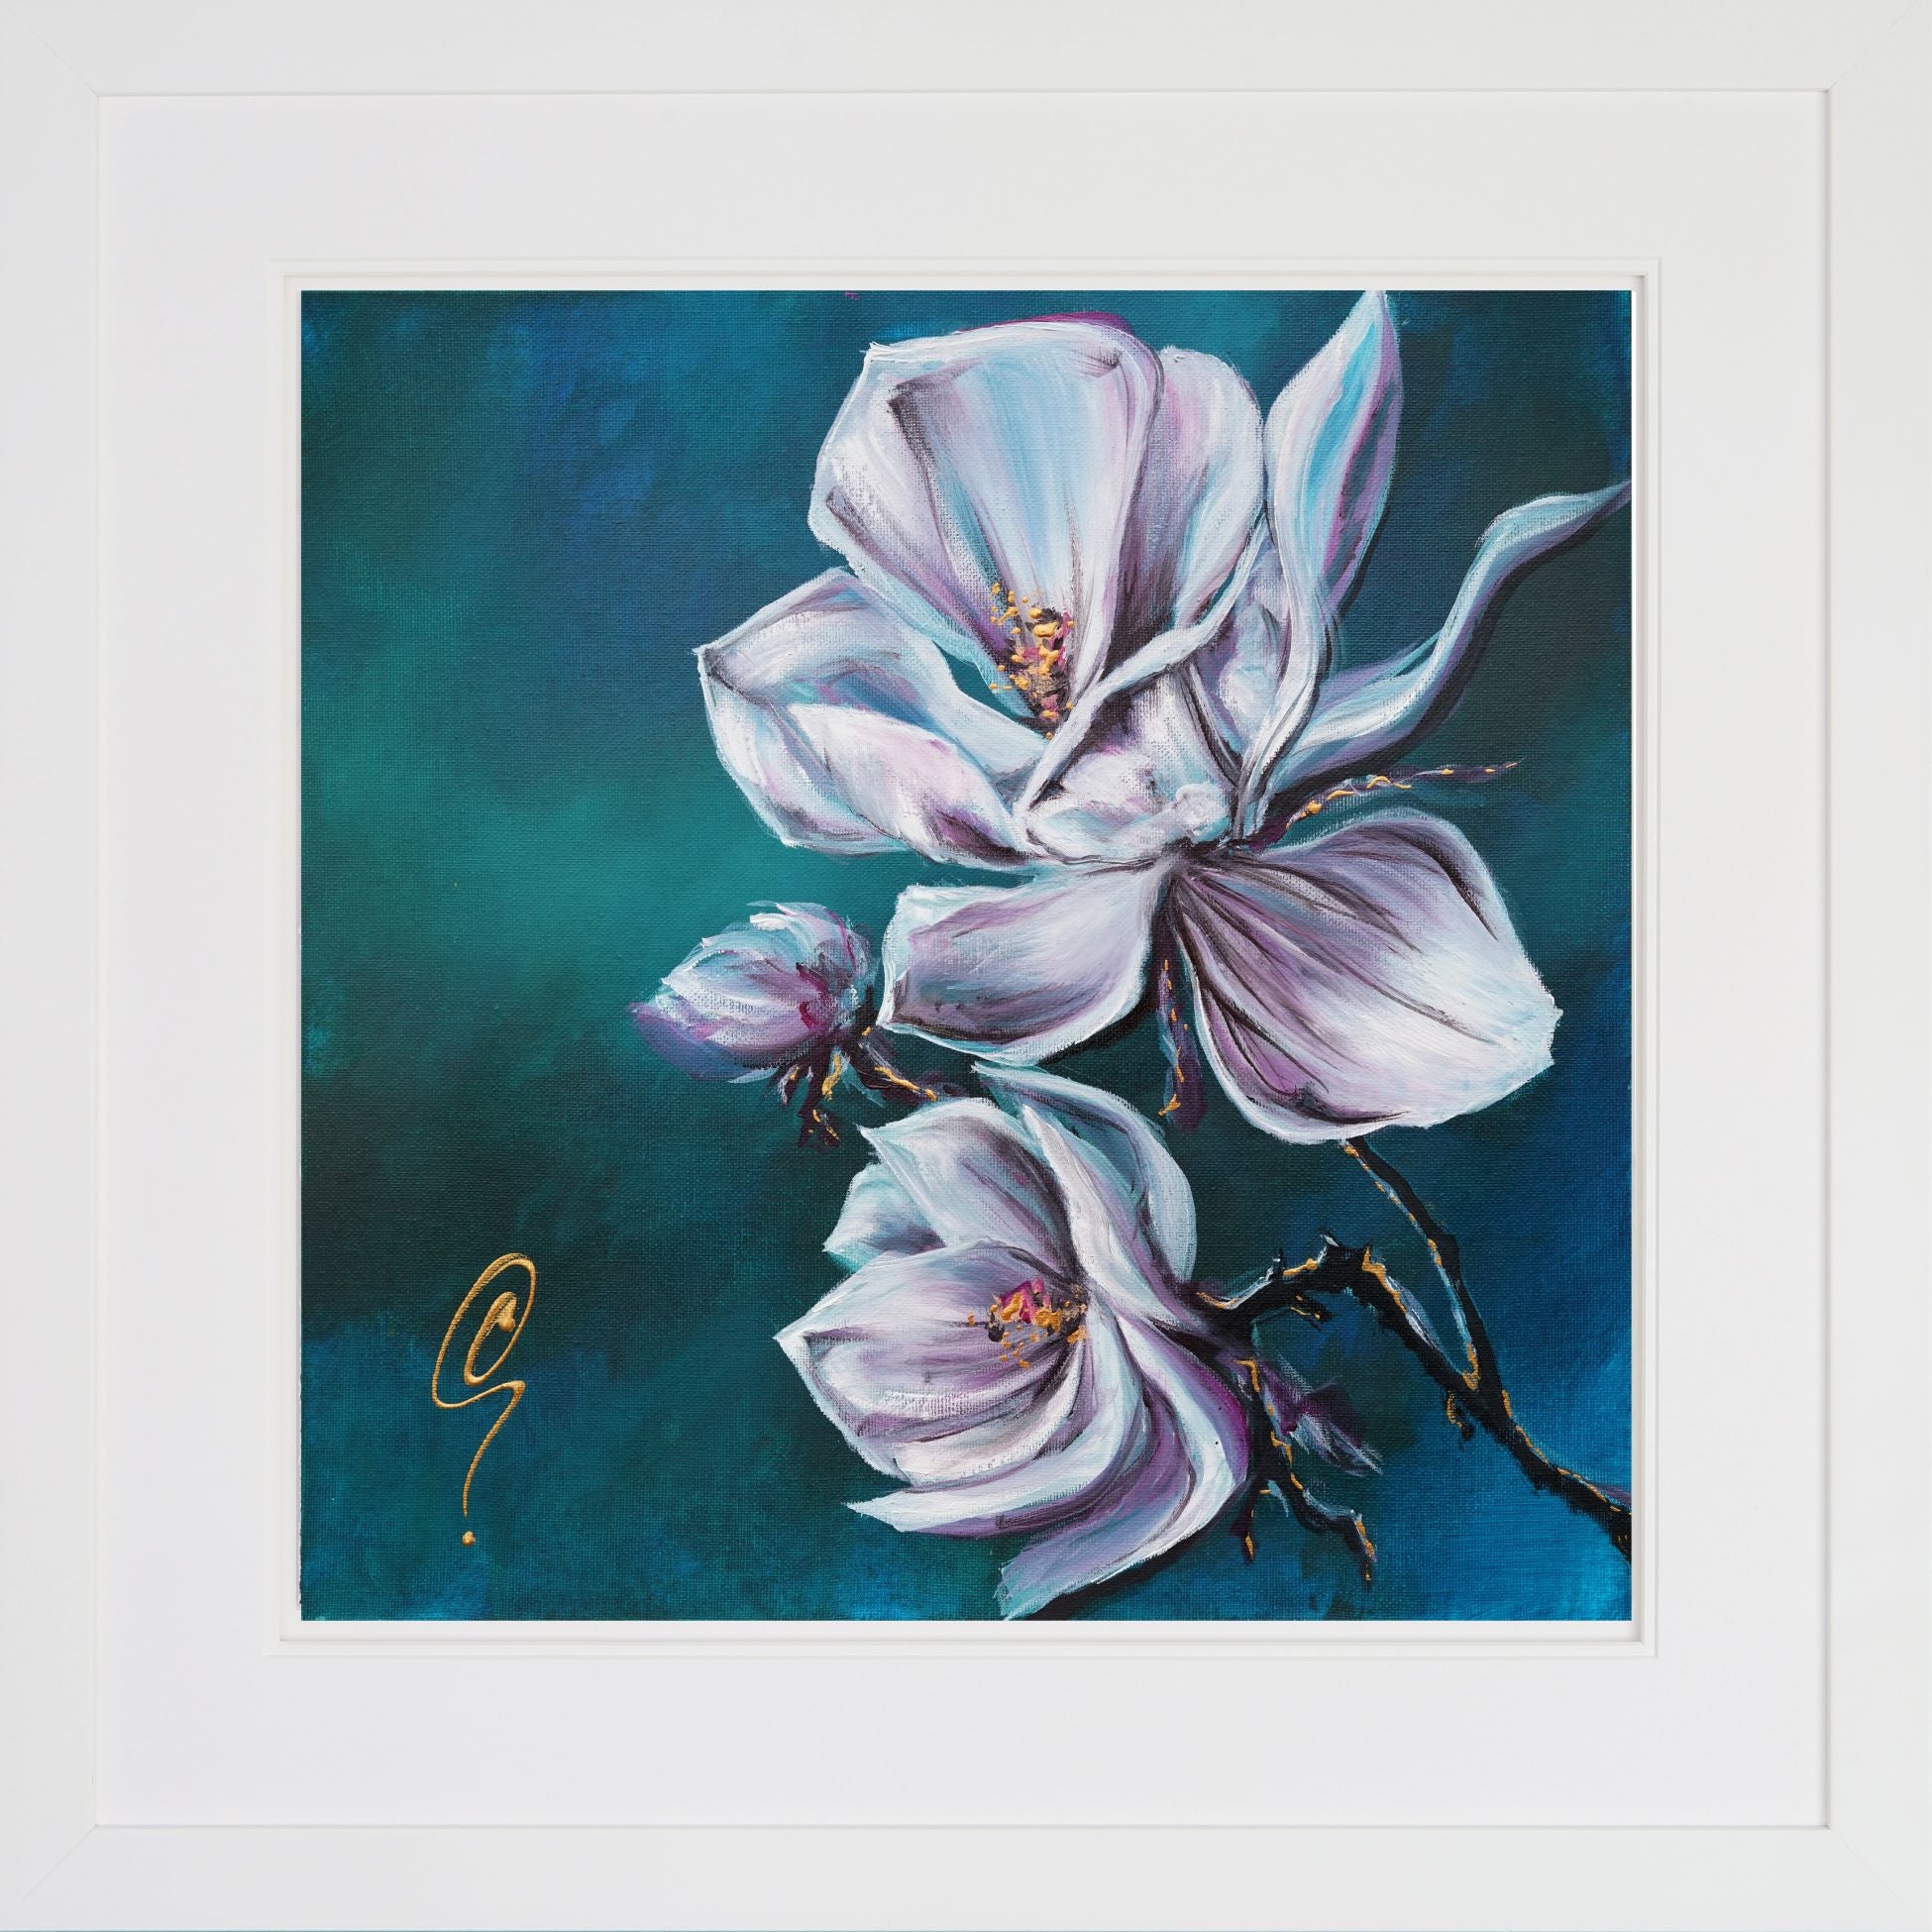 Clare Sykes - 'Moon Flower' -  Framed Limited Edition